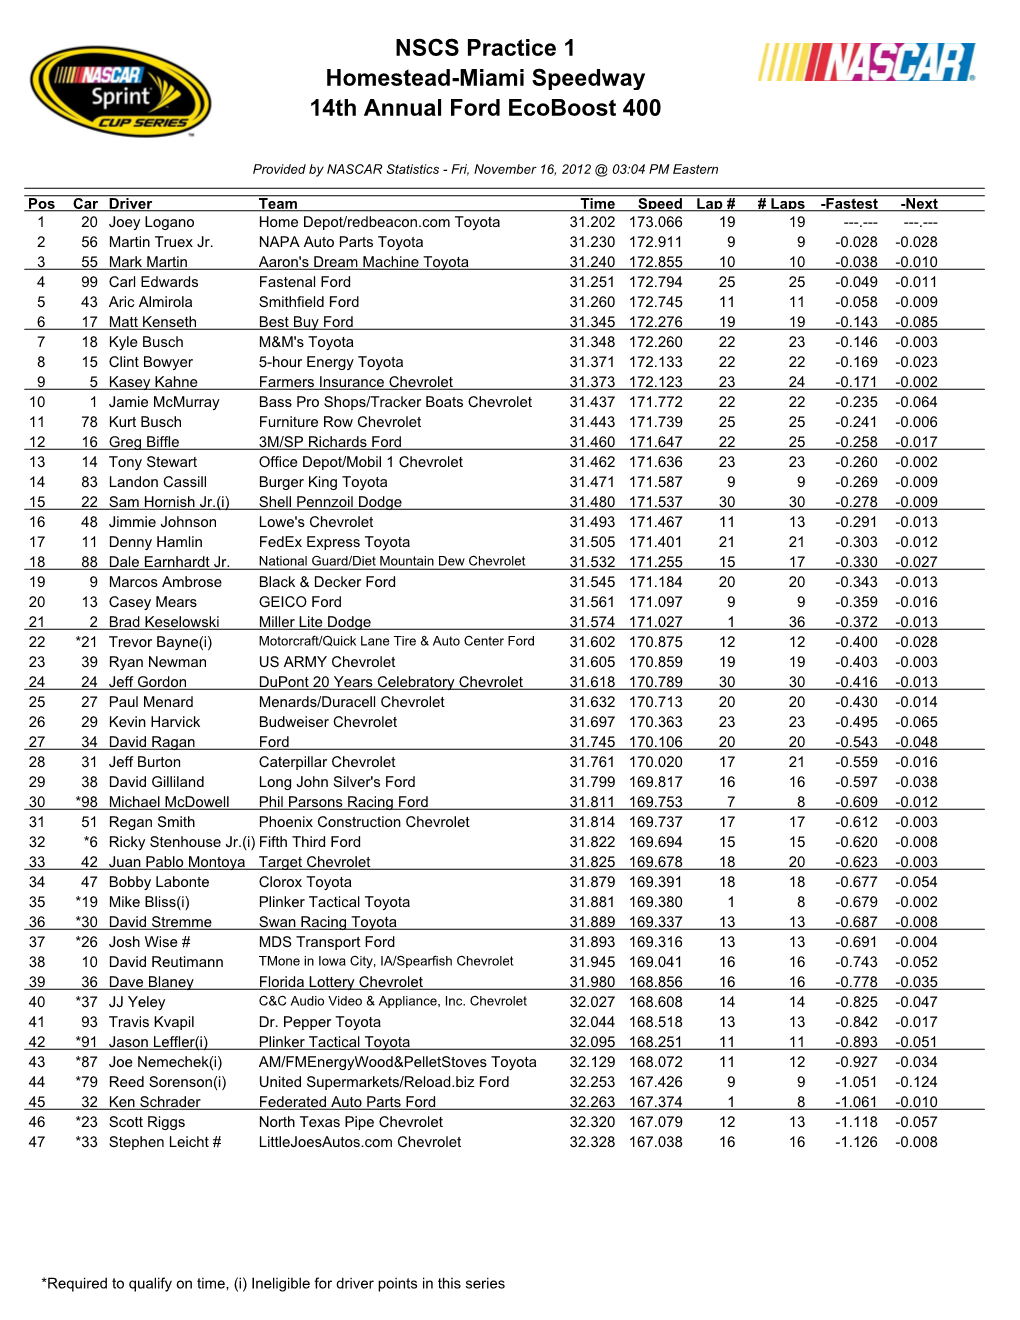 NSCS Practice 1 Homestead-Miami Speedway 14Th Annual Ford Ecoboost 400